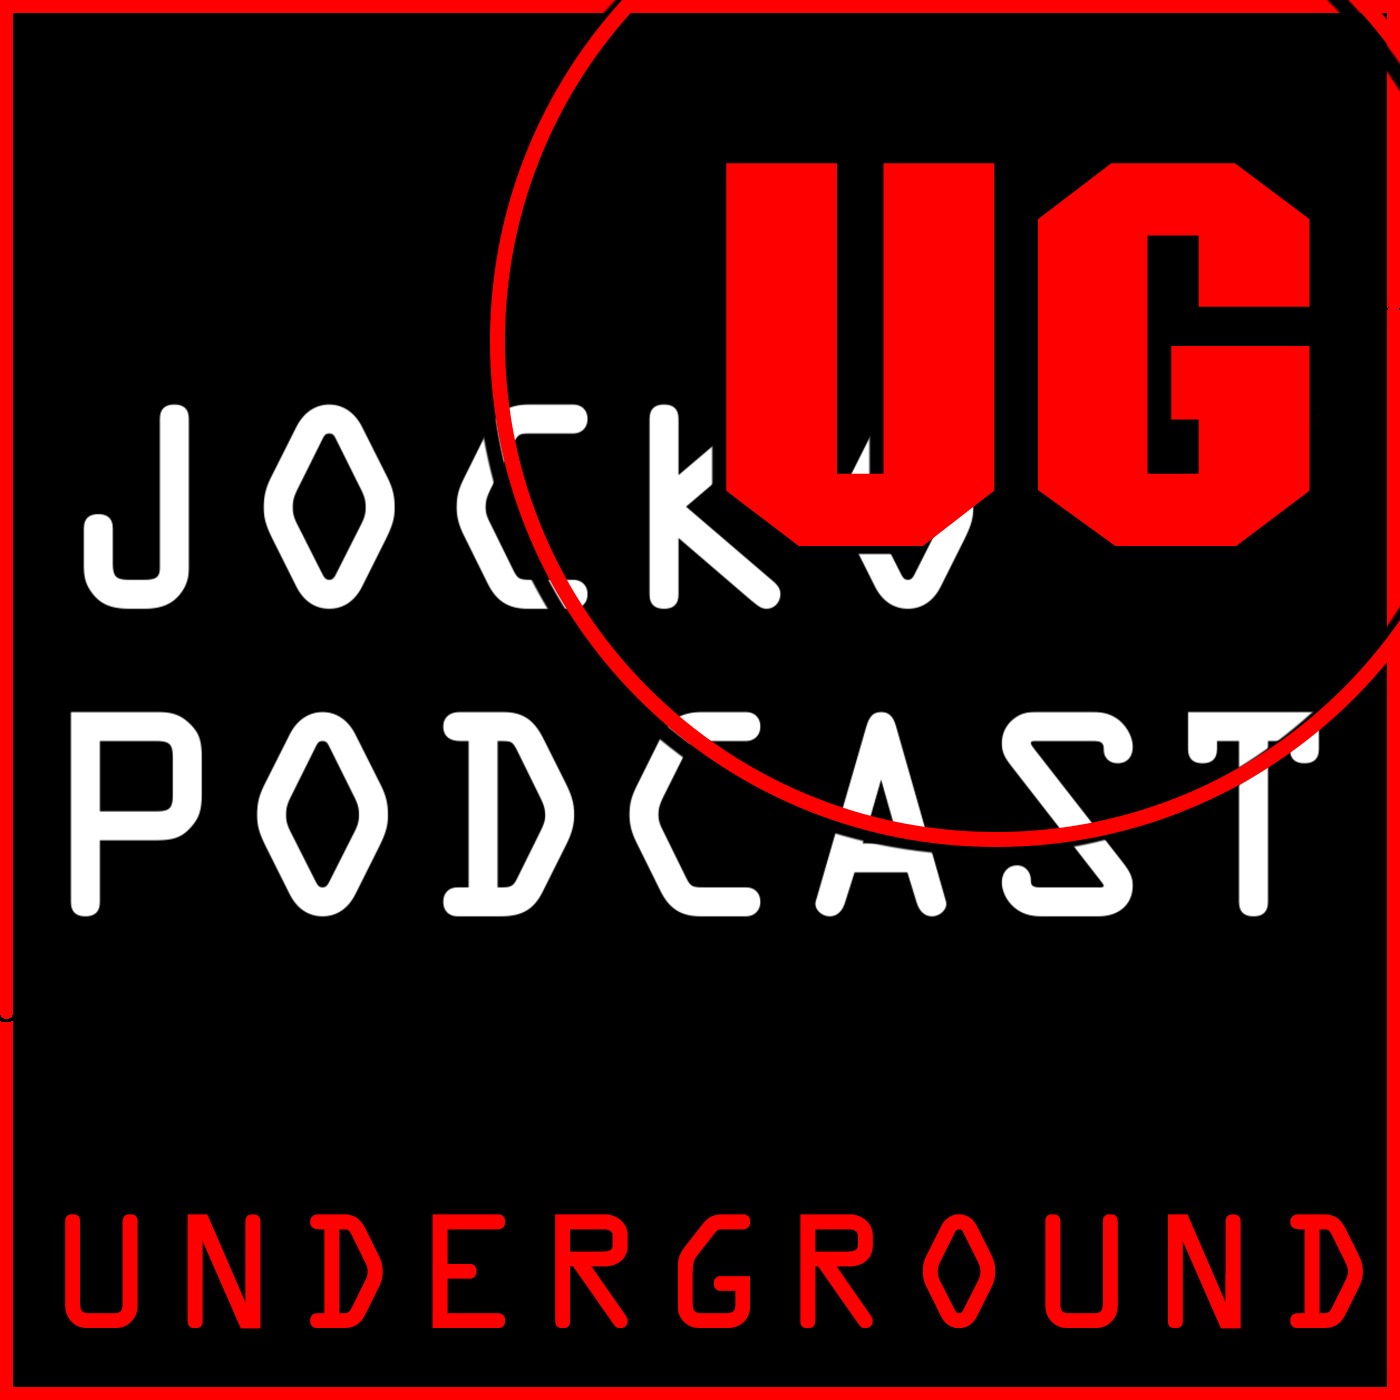 Jocko Underground: Try Not Having an Opinion About EVERY FREAKIN THING.